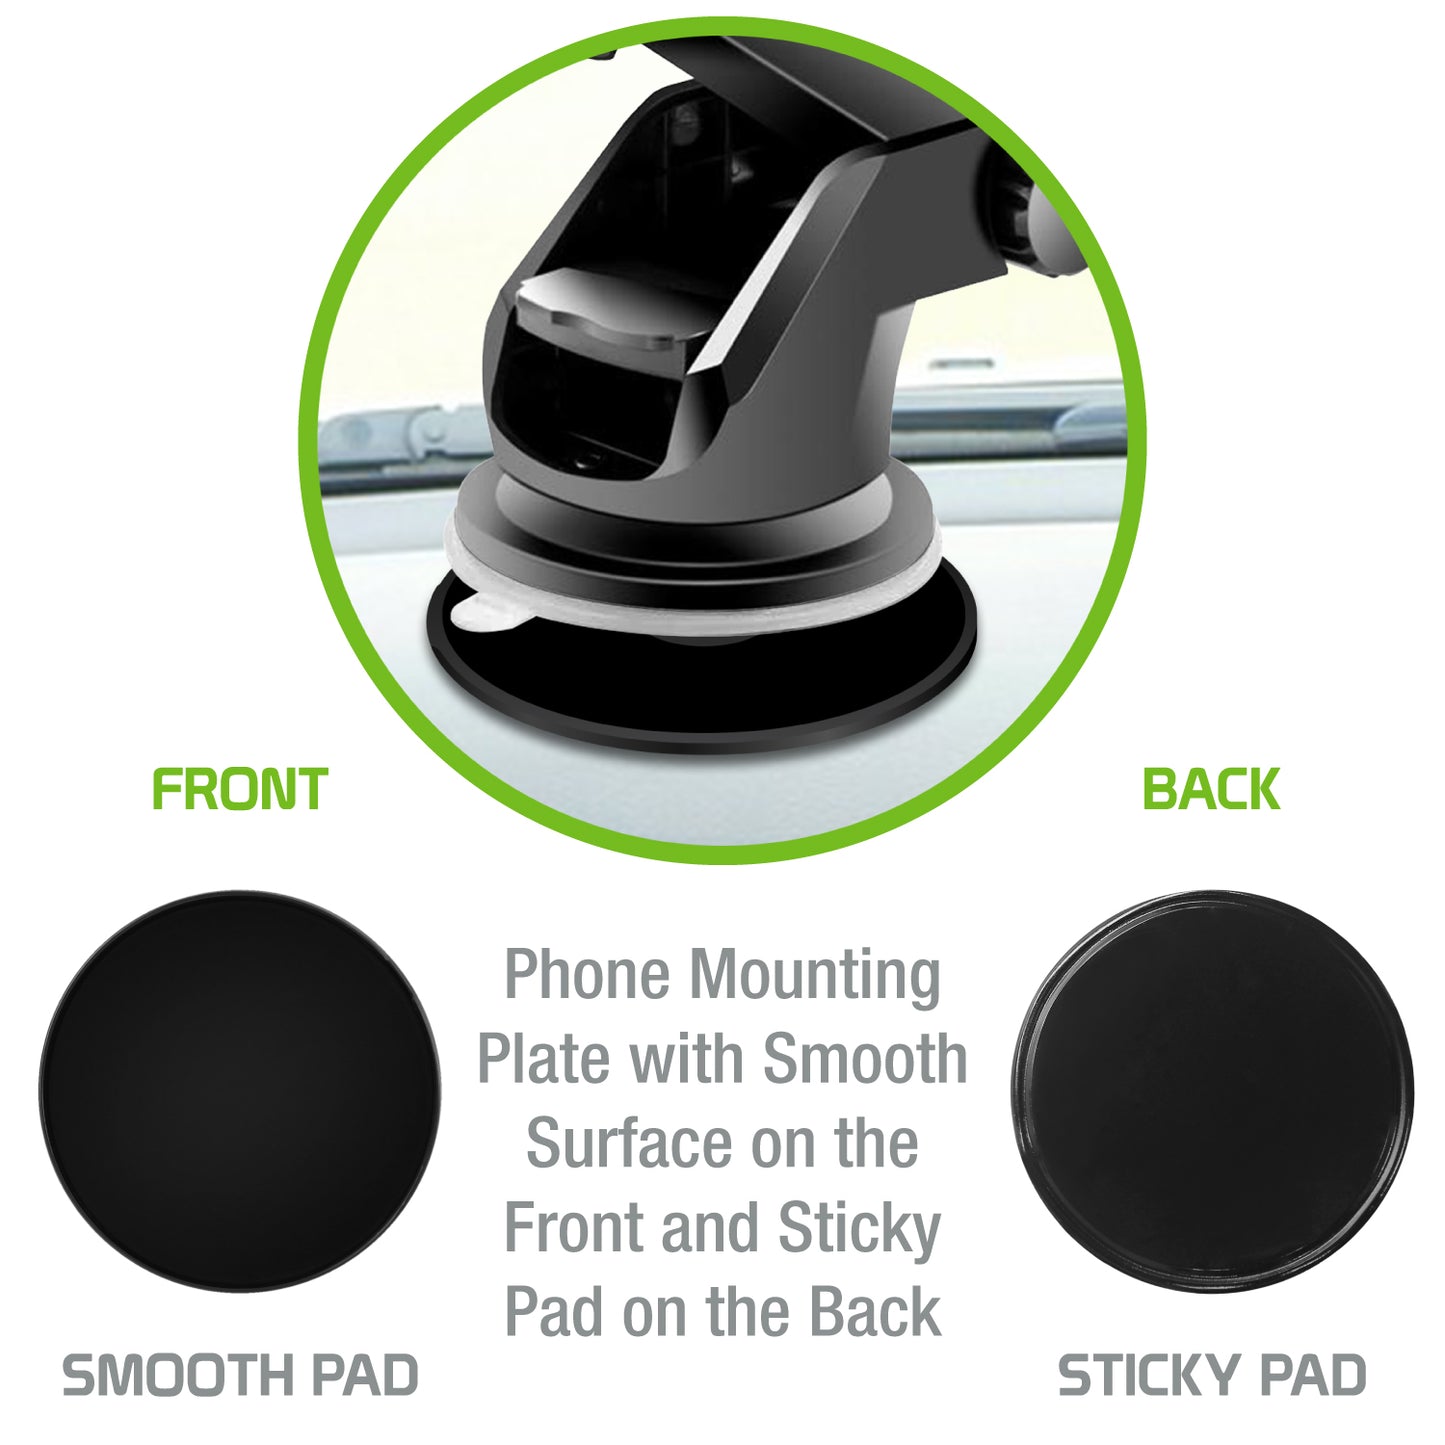 DISK3 - Disc Base for Phone Mount 3 Pieces